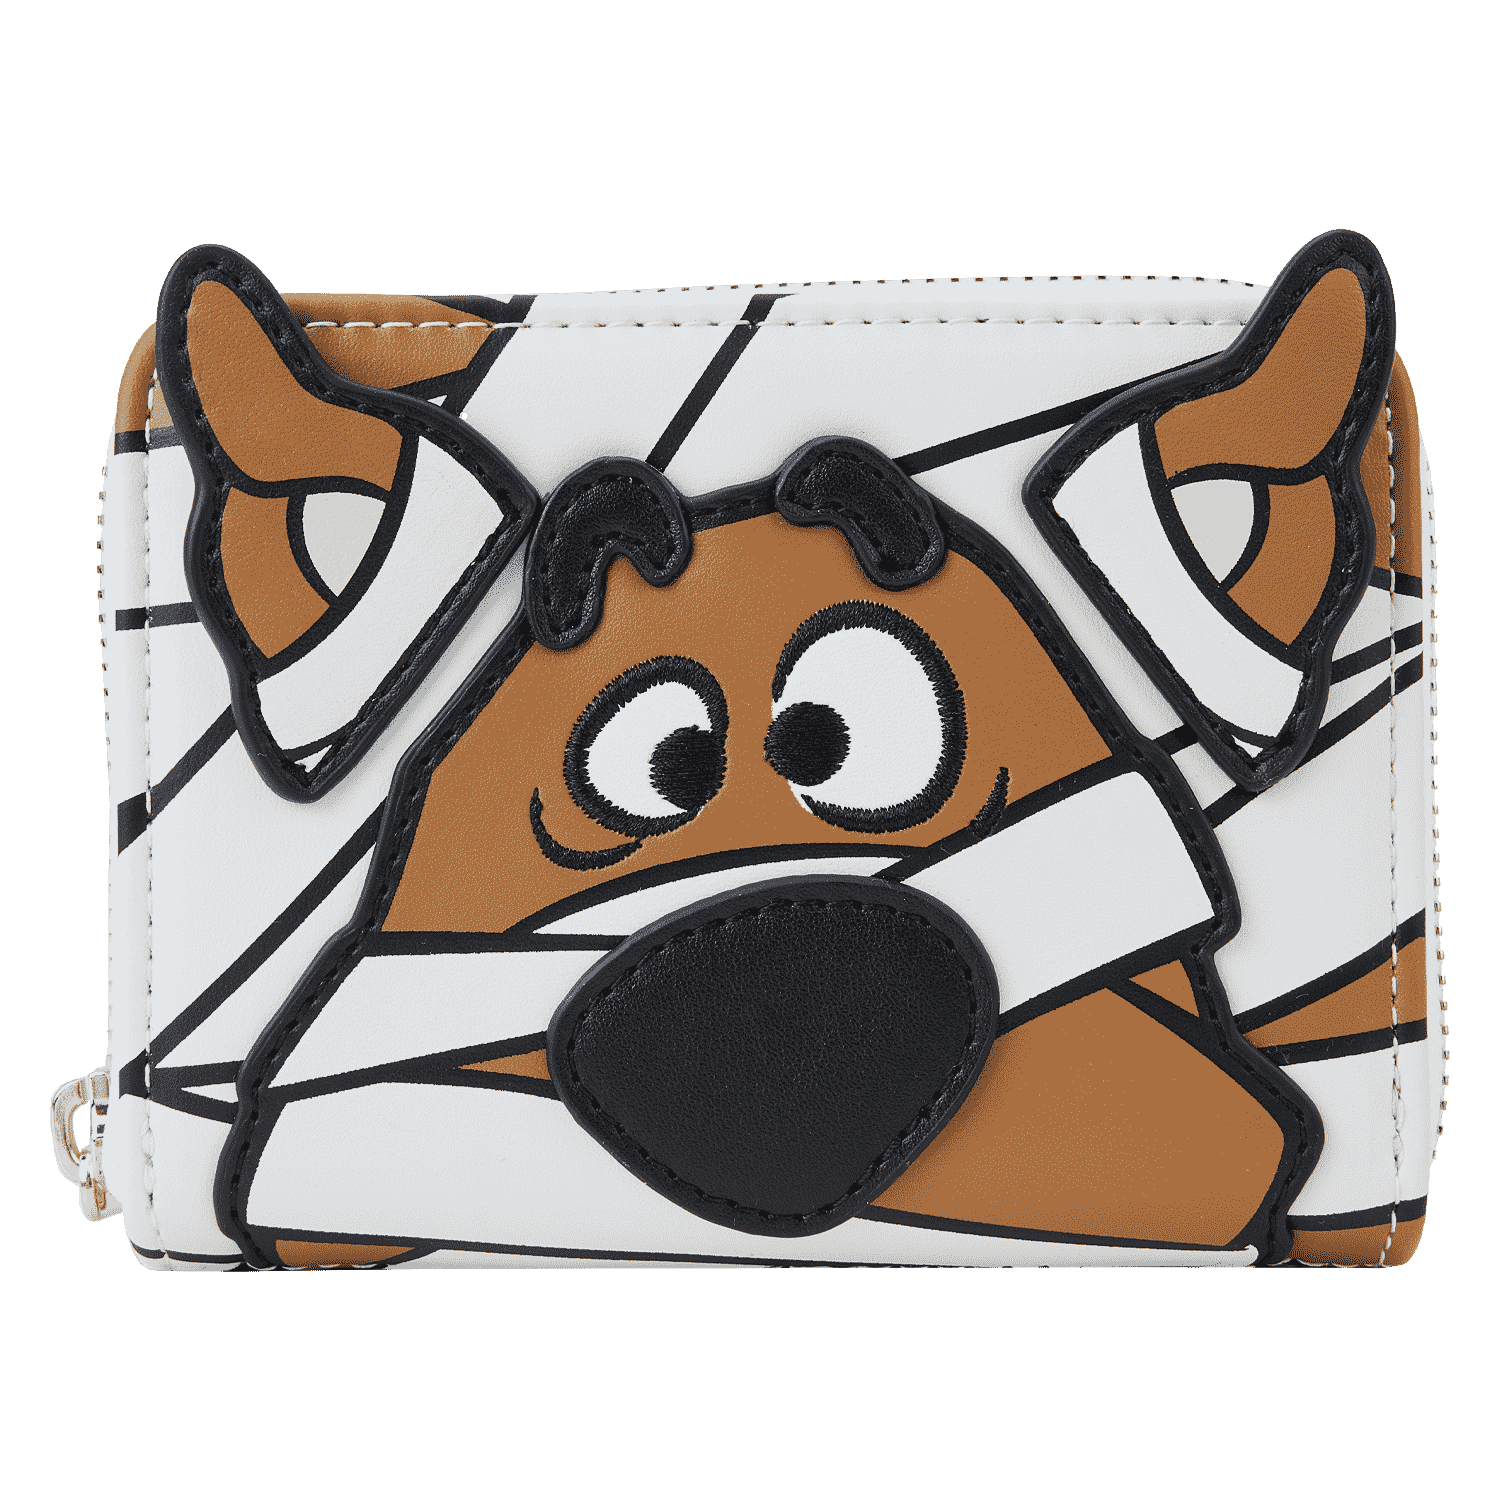 Buy Scooby-Doo Mummy Glow Cosplay Zip Around Wallet at Loungefly.